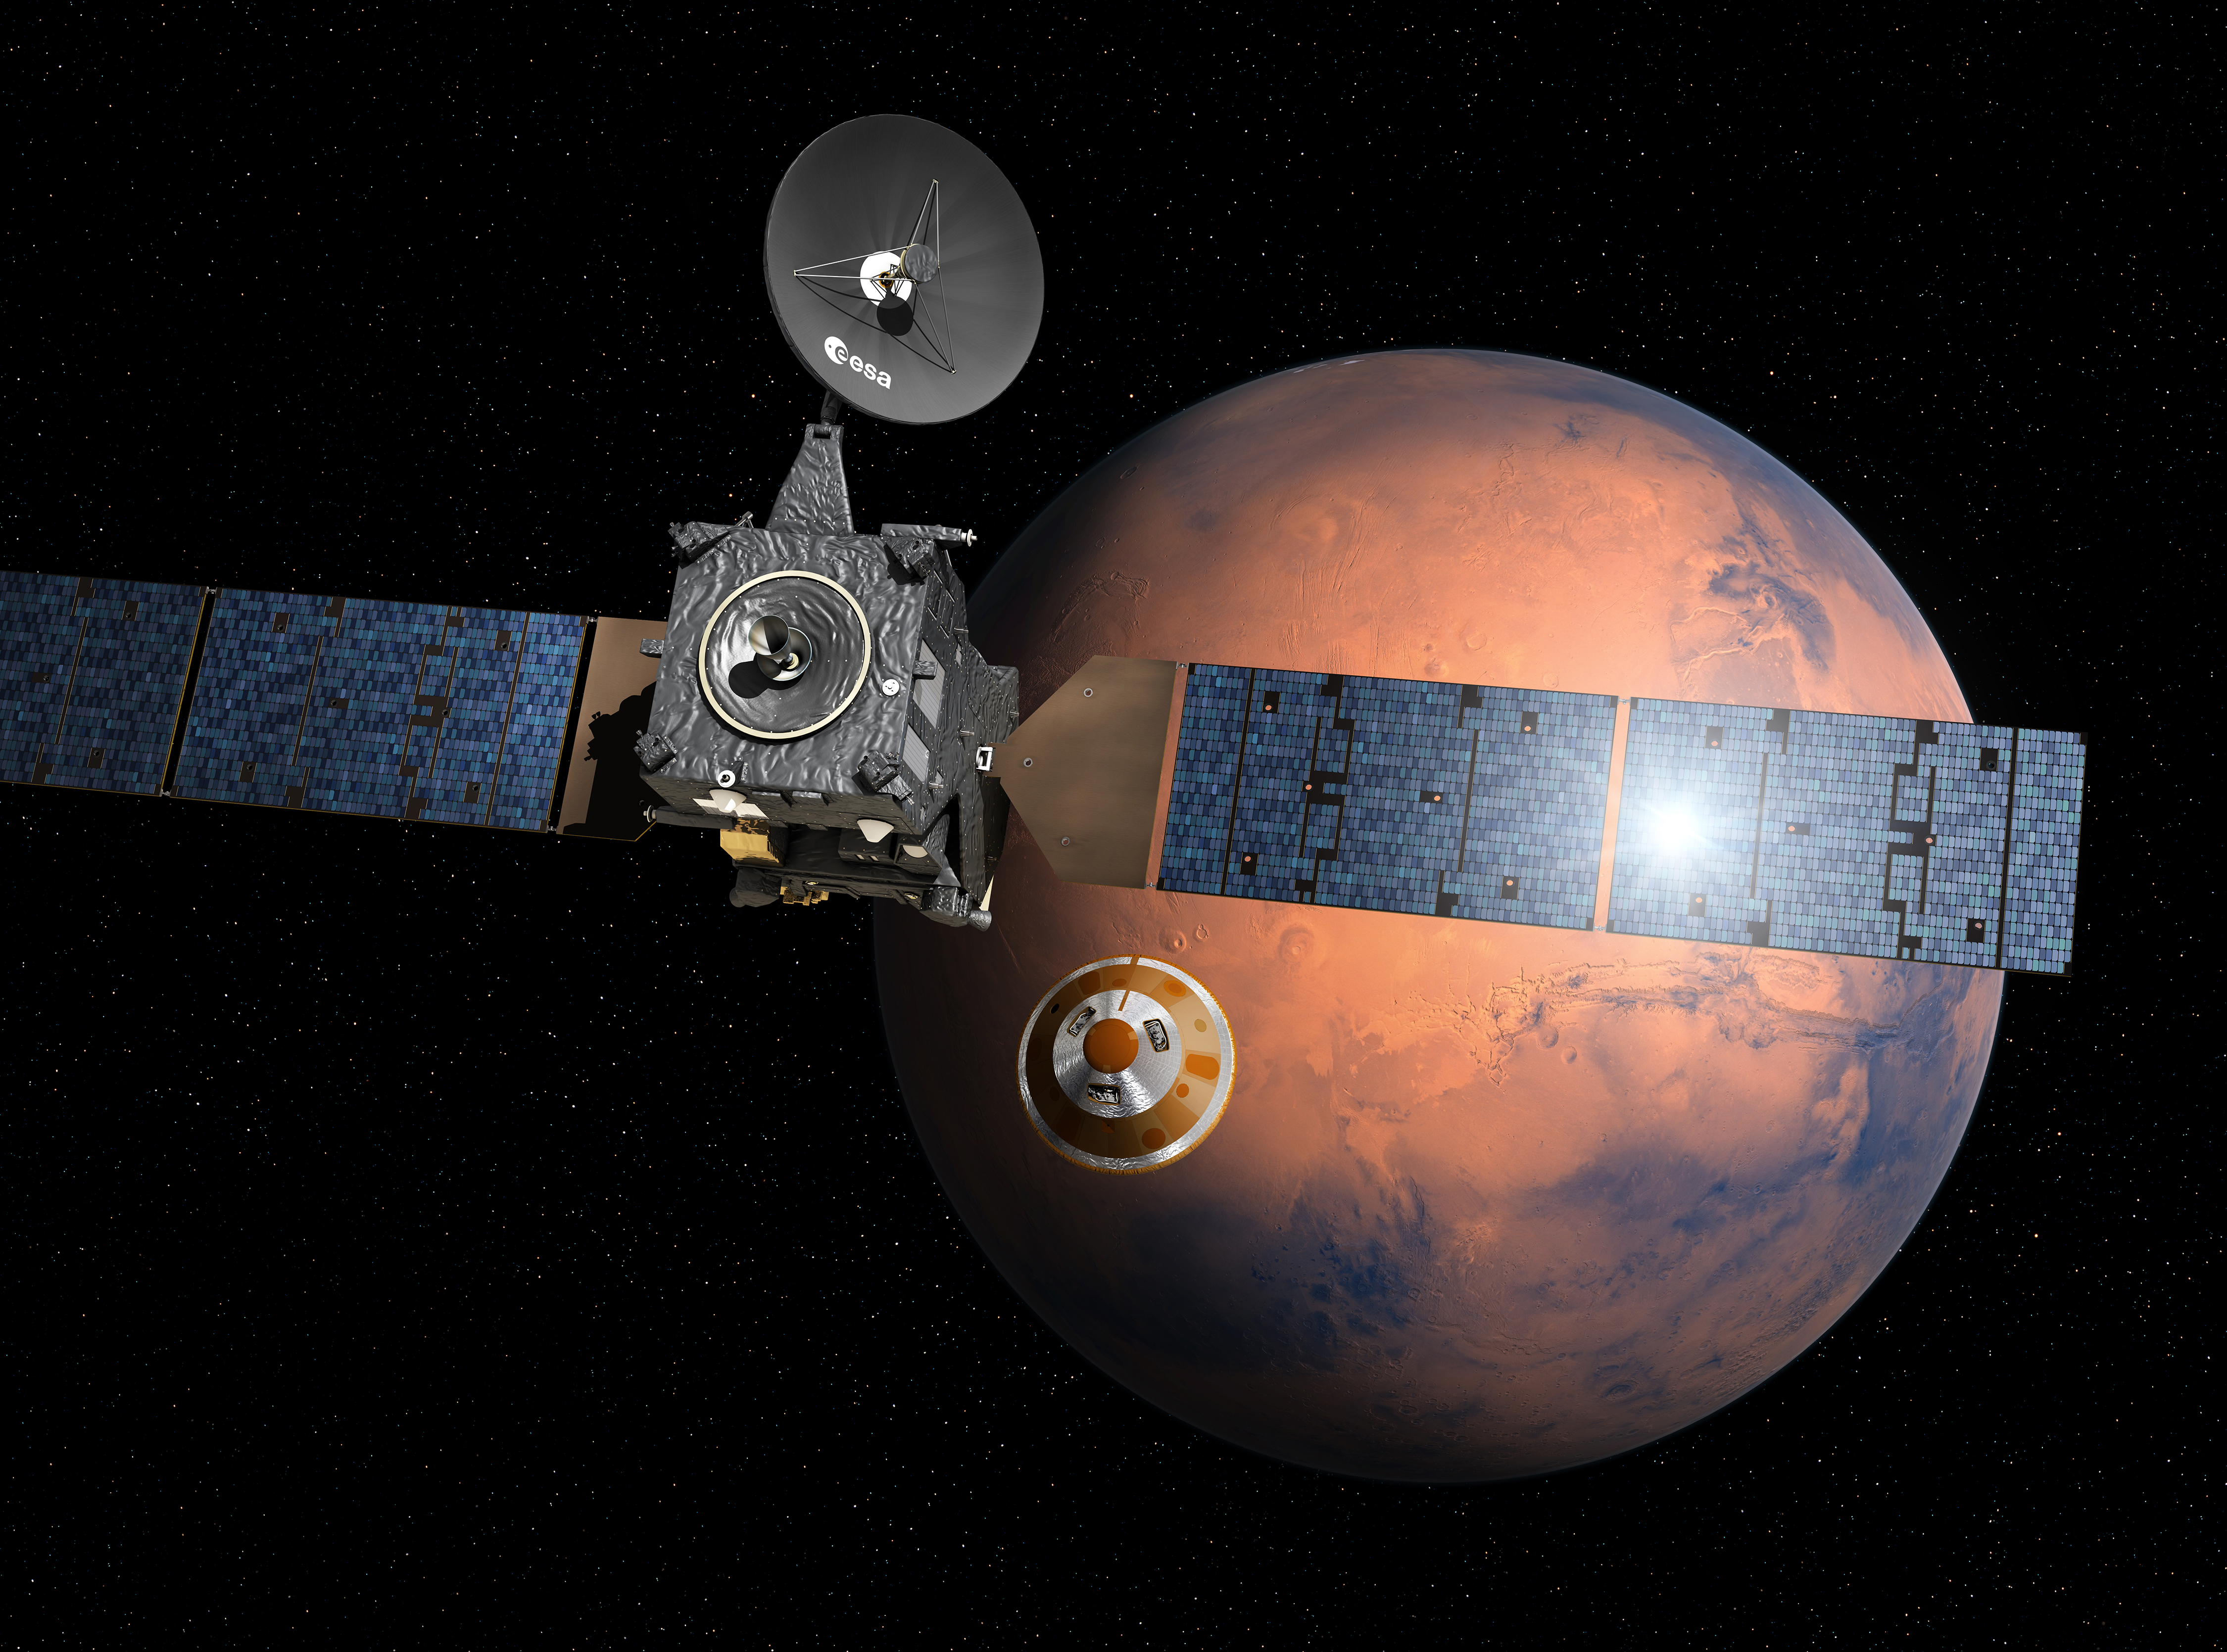 Artist’s impression depicting the separation of the ExoMars 2016 entry, descent and landing demonstrator module, named Schiaparelli, from the Trace Gas Orbiter, and heading for Mars. TGO will be launched in 2016 with Schiaparelli, the entry, descent and landing demonstrator module. It will search for evidence of methane and other atmospheric gases that could be signatures of active biological or geological processes on Mars. TGO will also serve as a communications relay for the rover and surface science platform that will be launched in 2018. Credit: ESA–D. Ducros